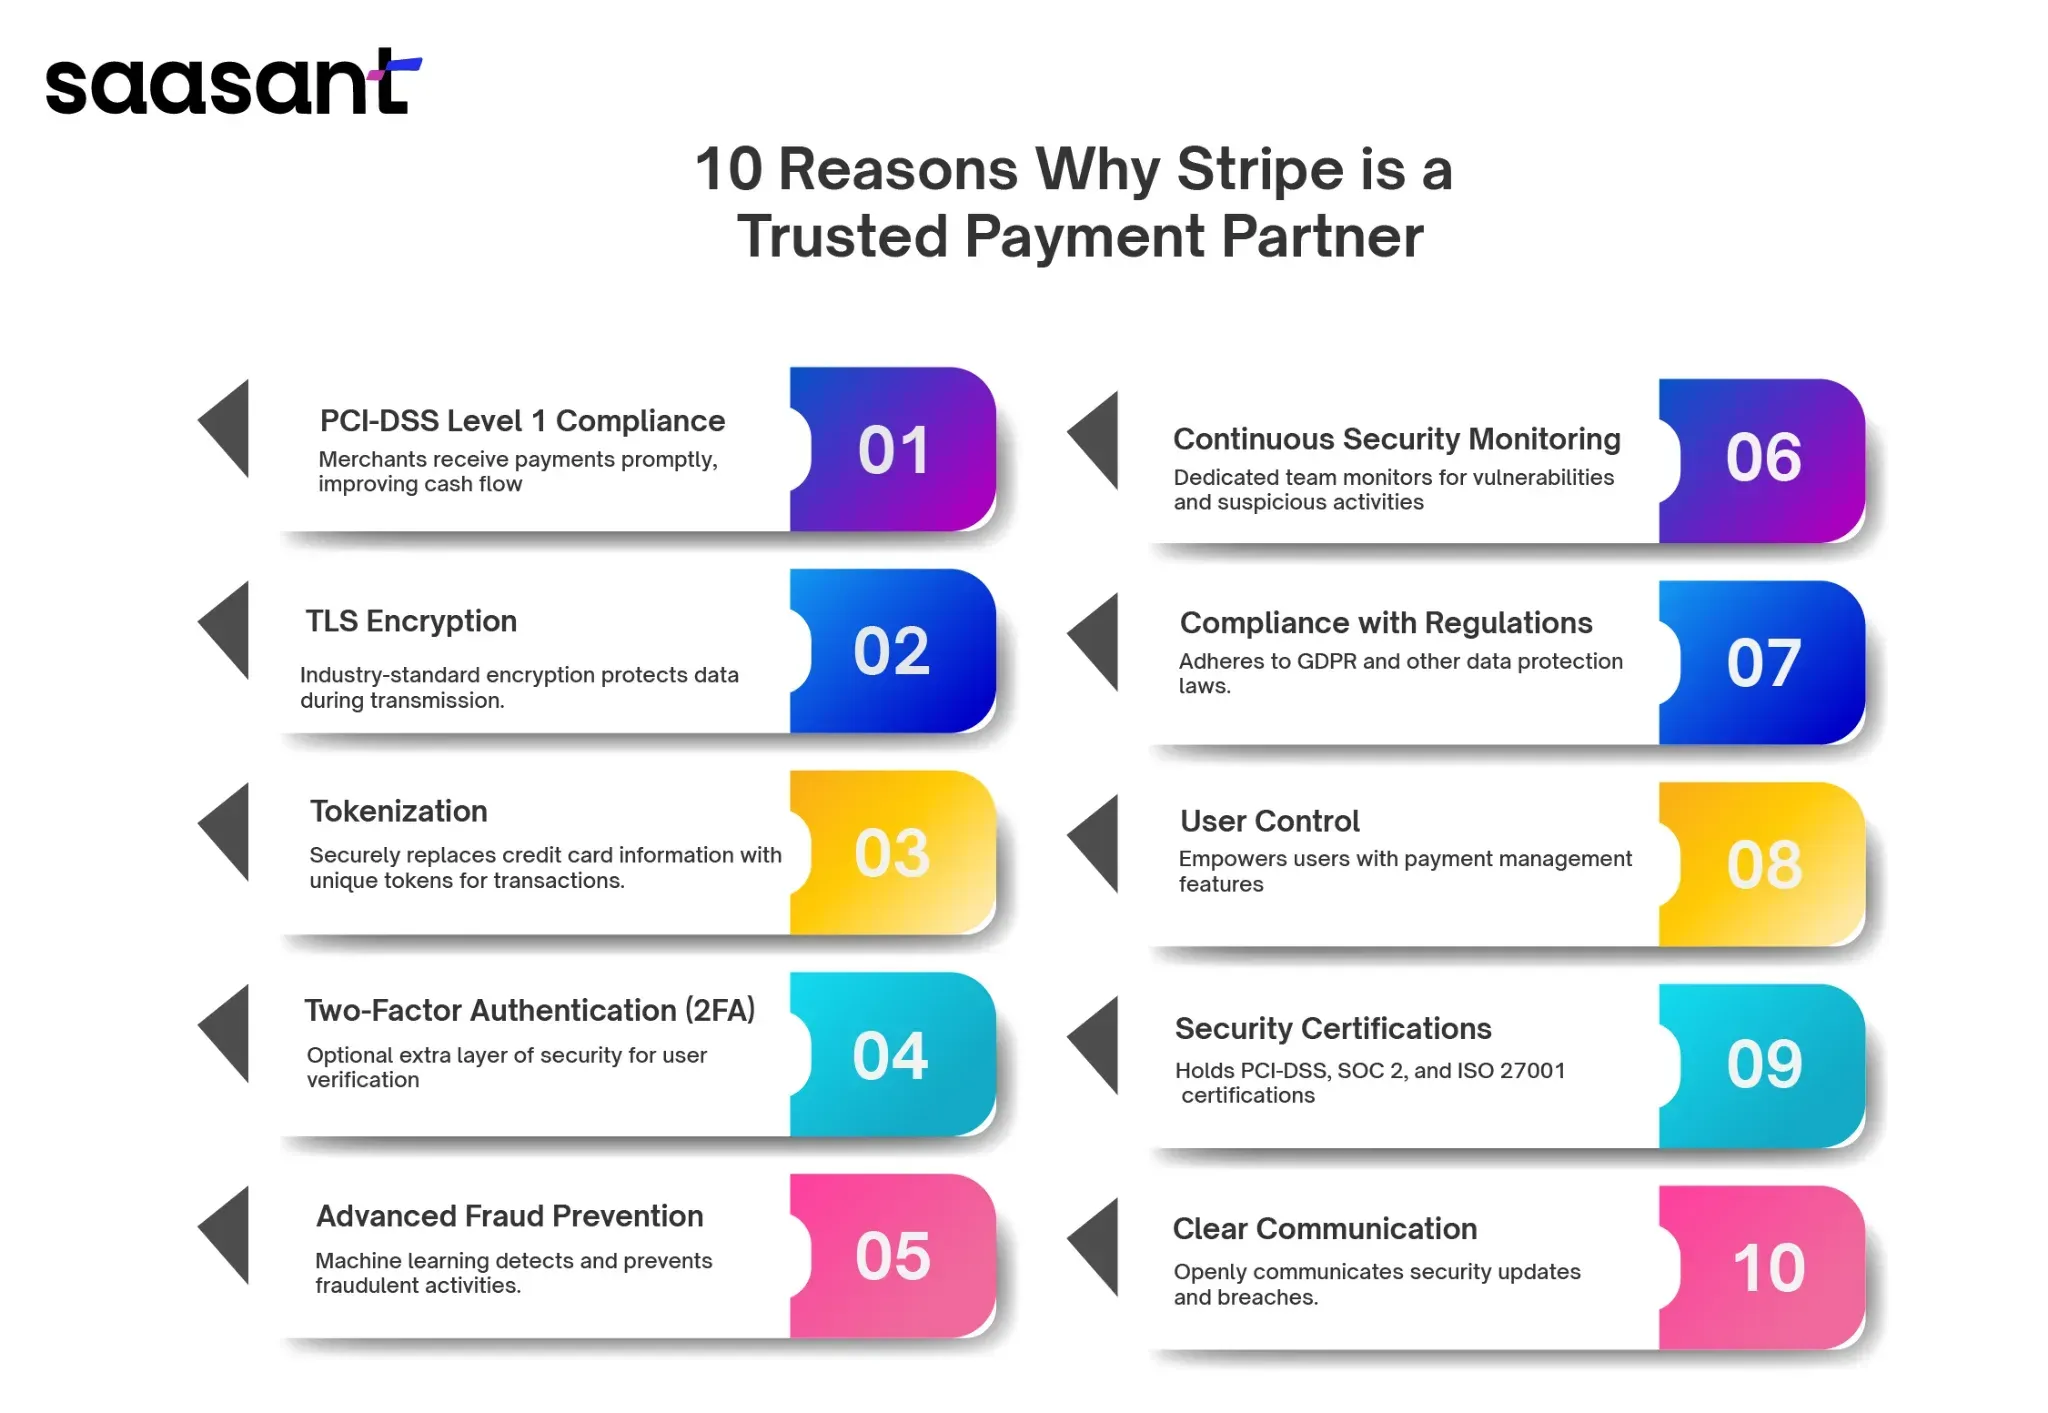 10 Reasons Why Stripe is a Trusted Payment Partner